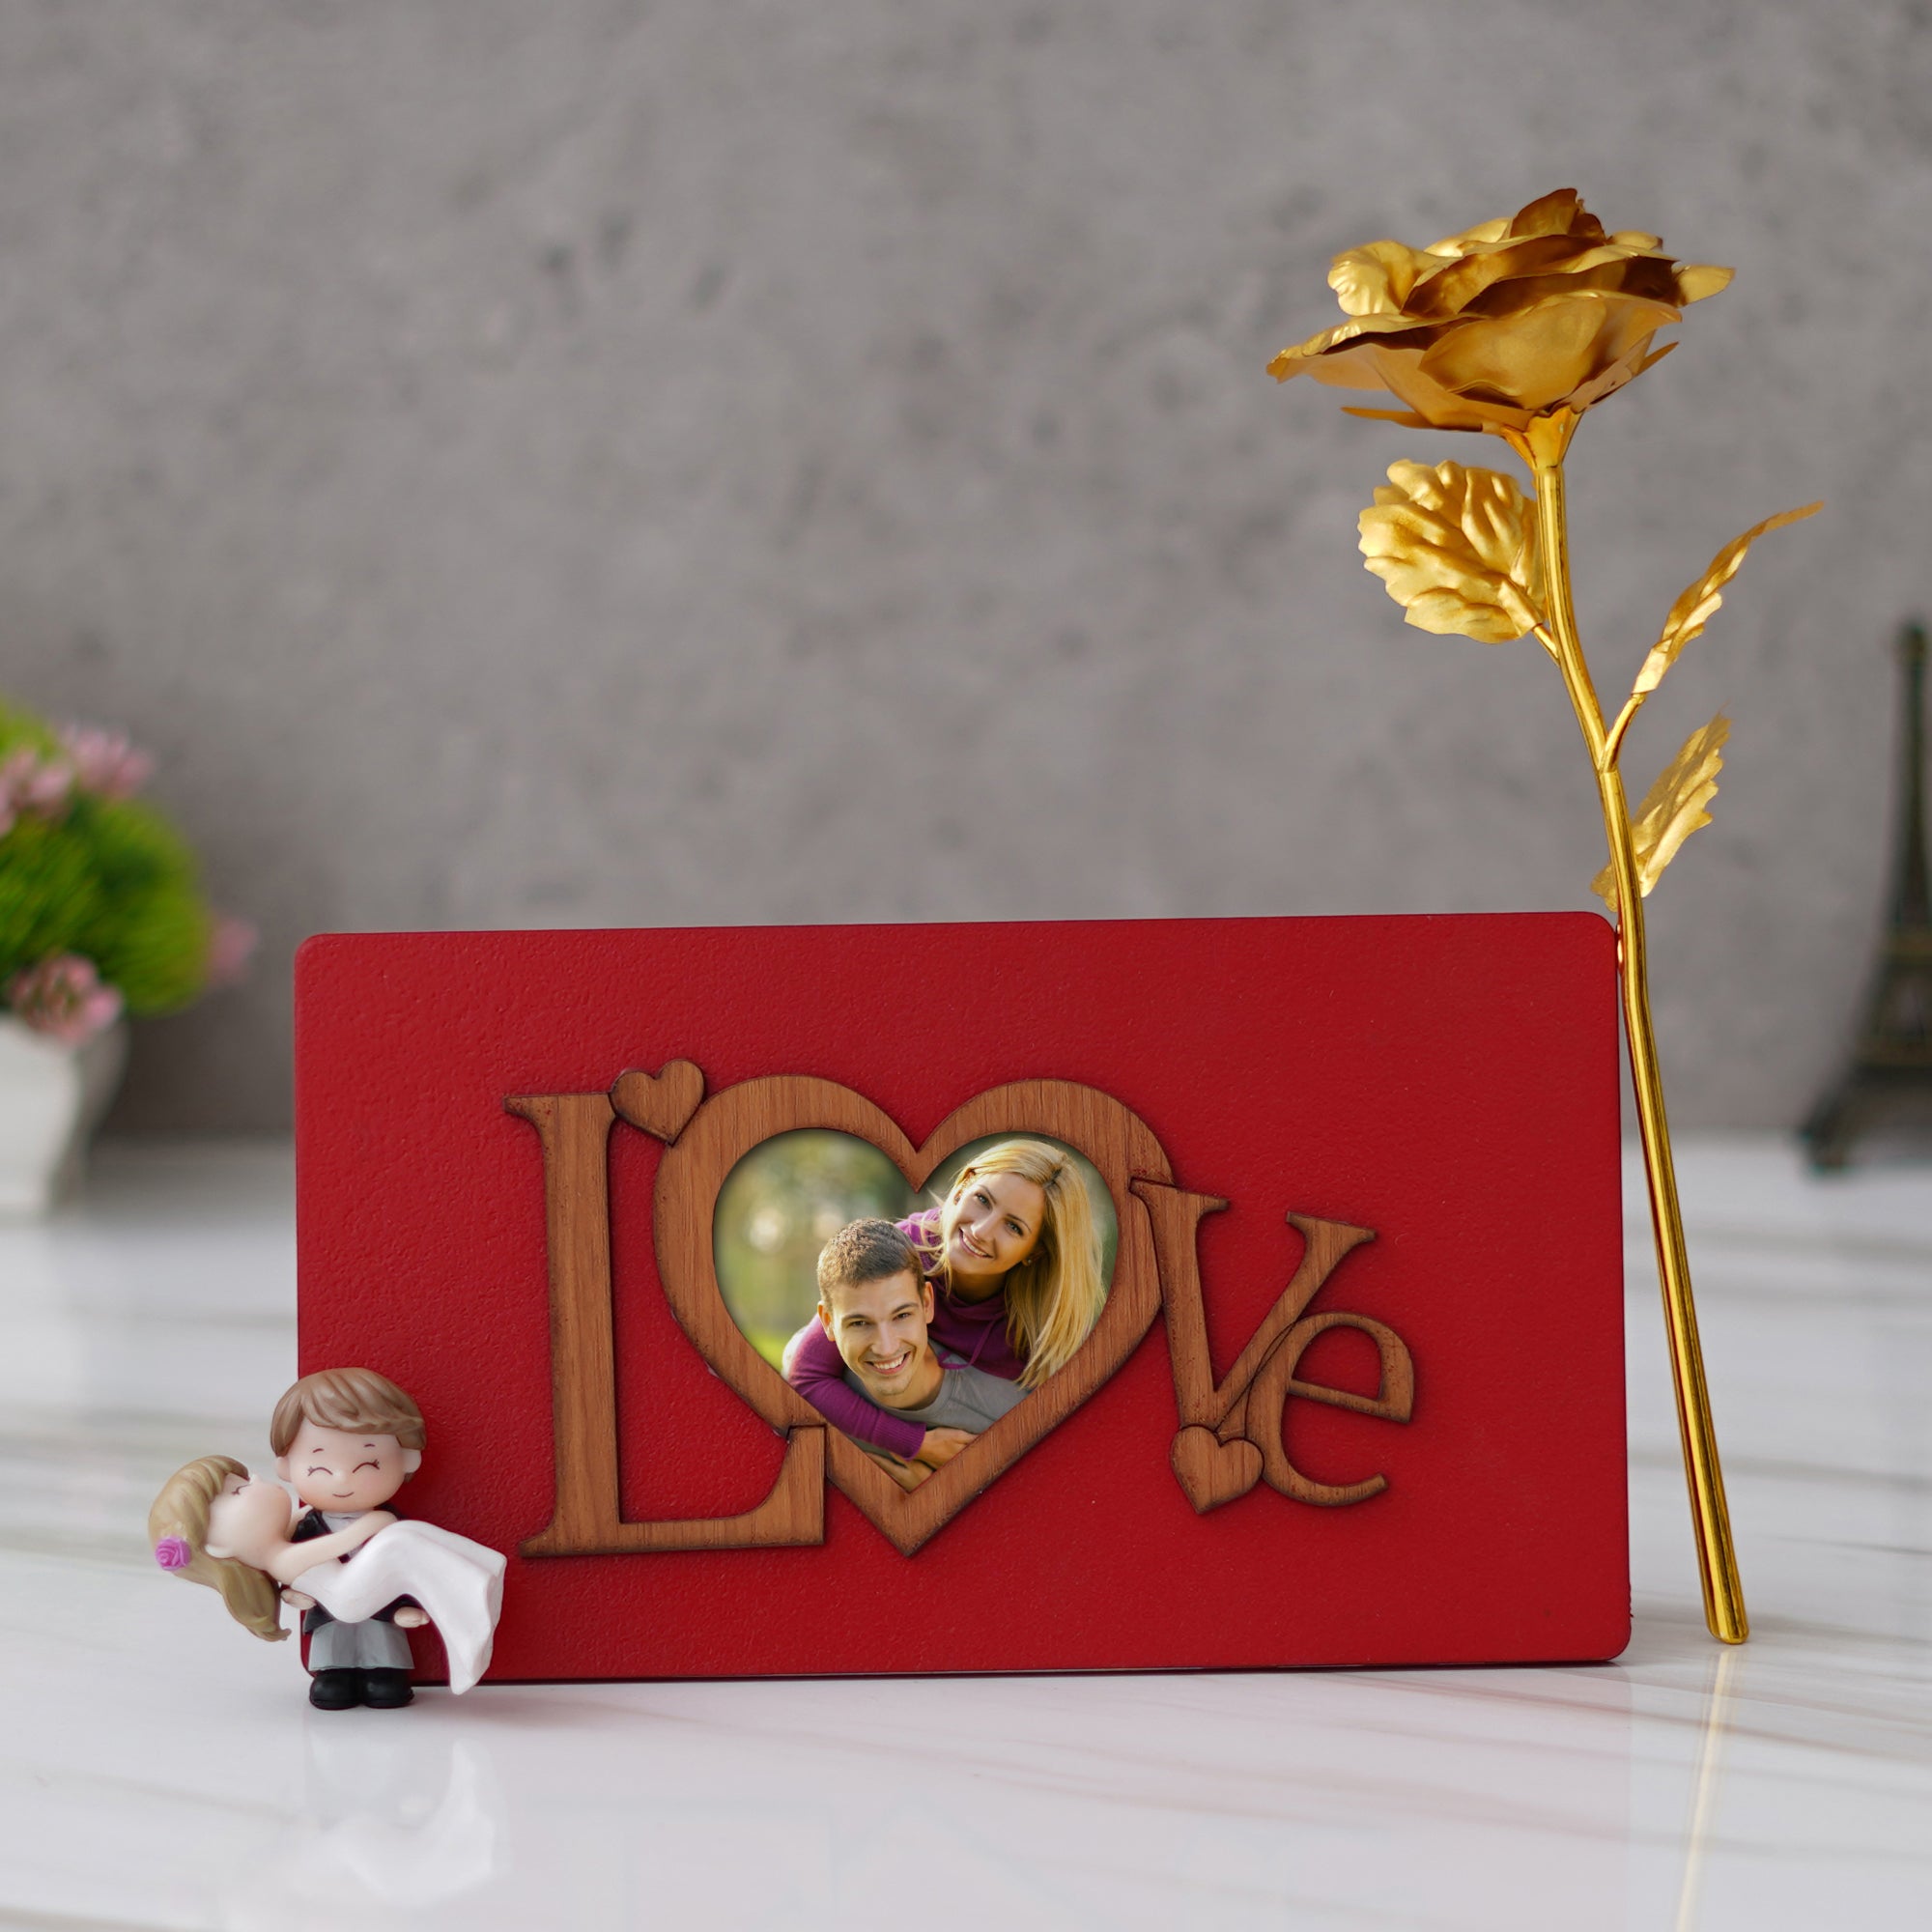 Valentine Combo of Golden Rose Gift Set, "Love" Wooden Photo Frame With Red Stand, Bride Kissing Groom Romantic Polyresin Decorative Showpiece